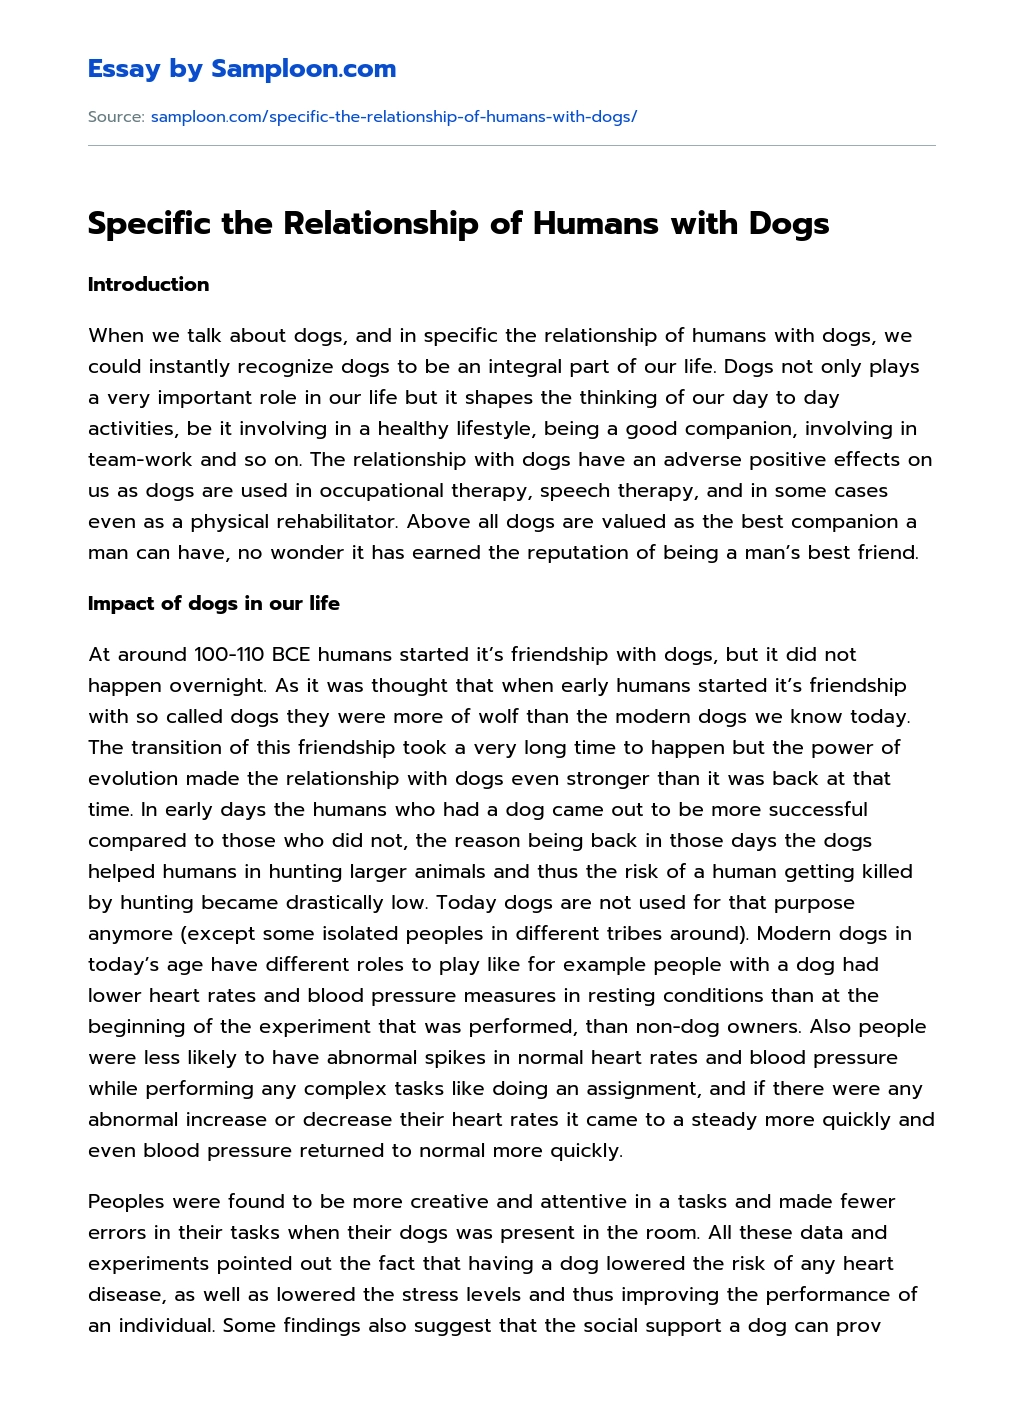 Specific the Relationship of Humans with Dogs essay